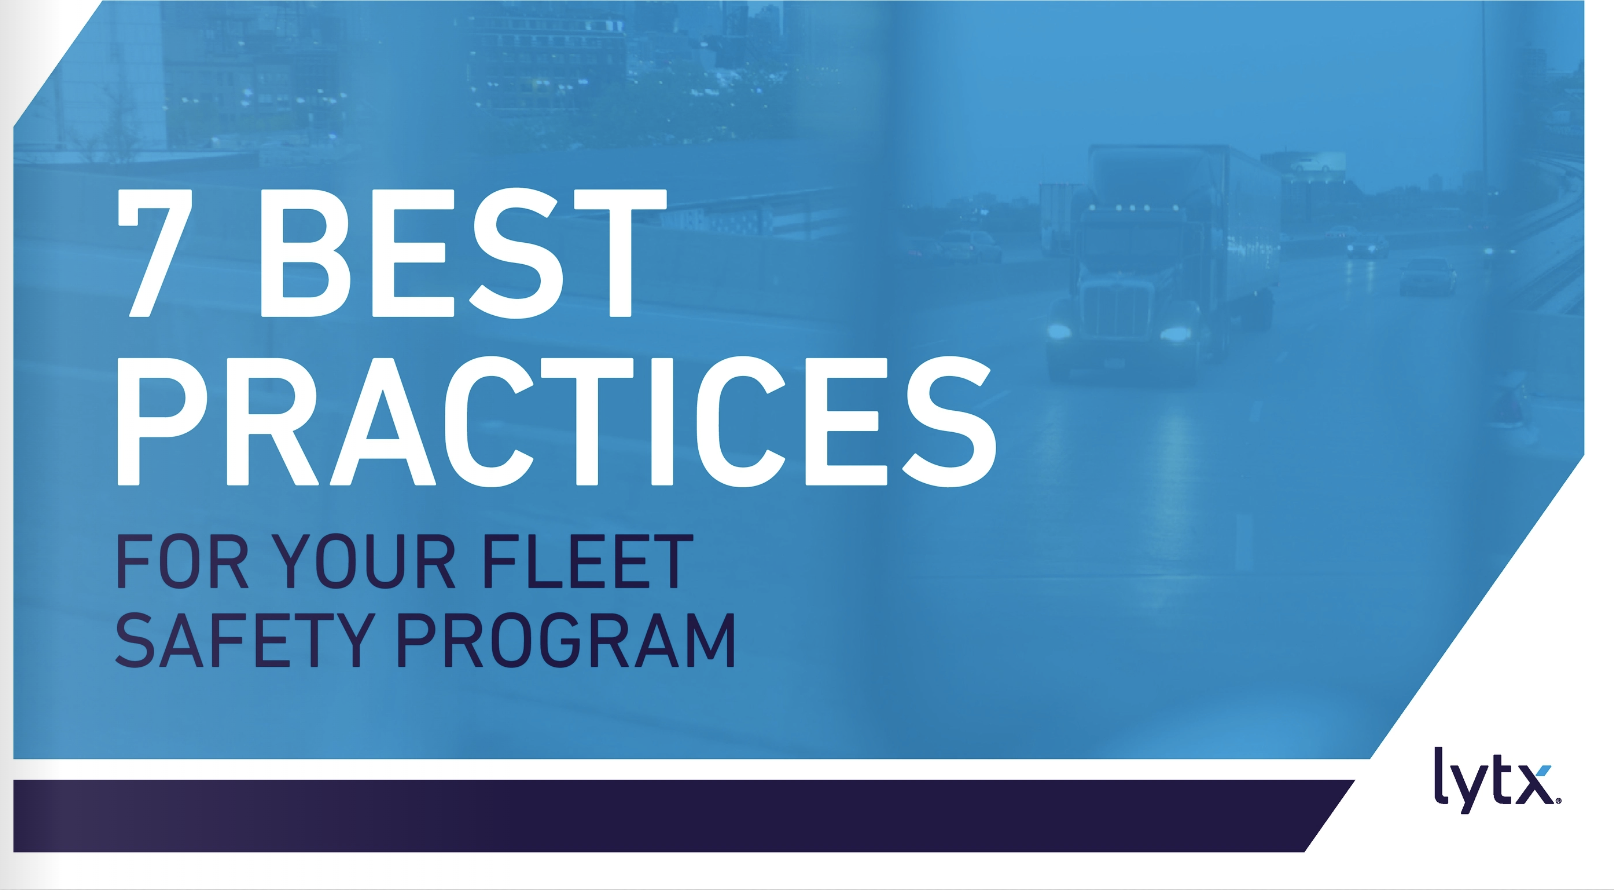 "7 Best Practices For Your Fleet Safety Program"